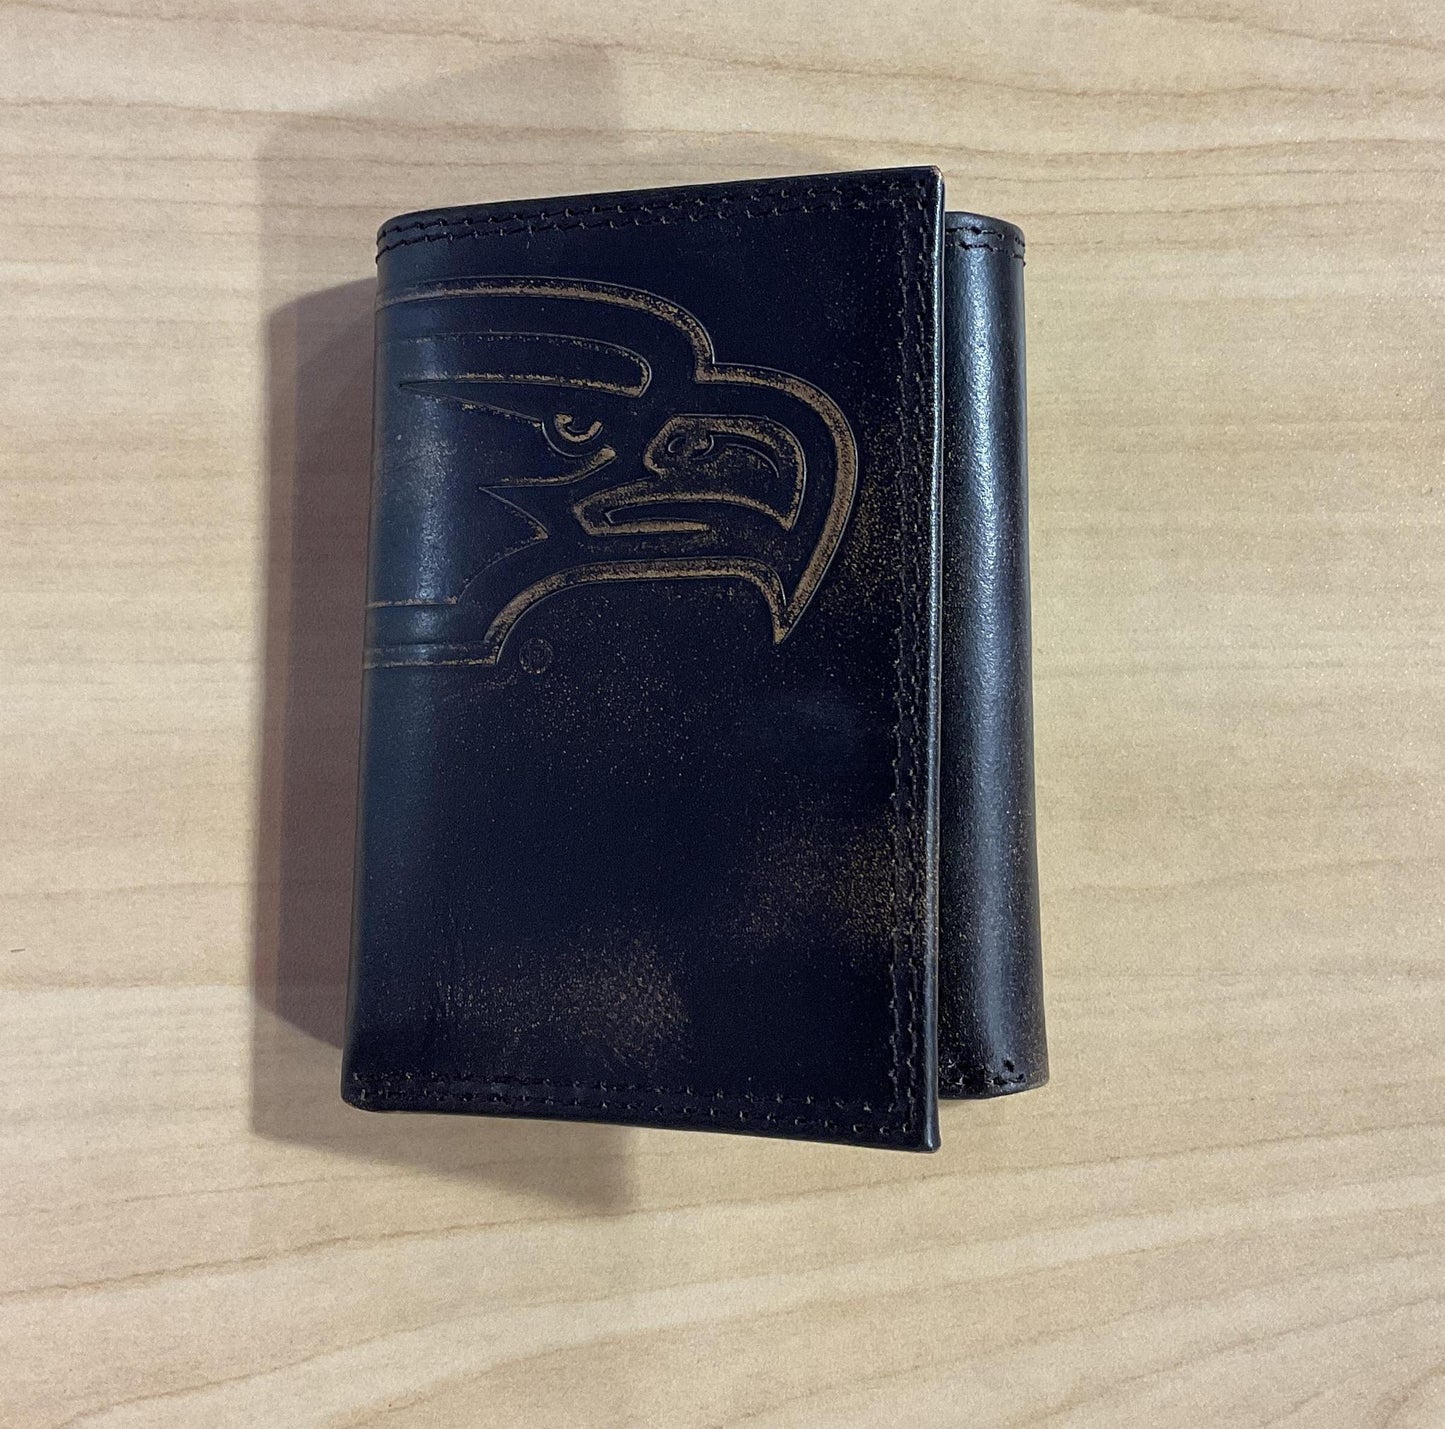 Zep-Pro Georgia Southern Stitched Trifold Wallet